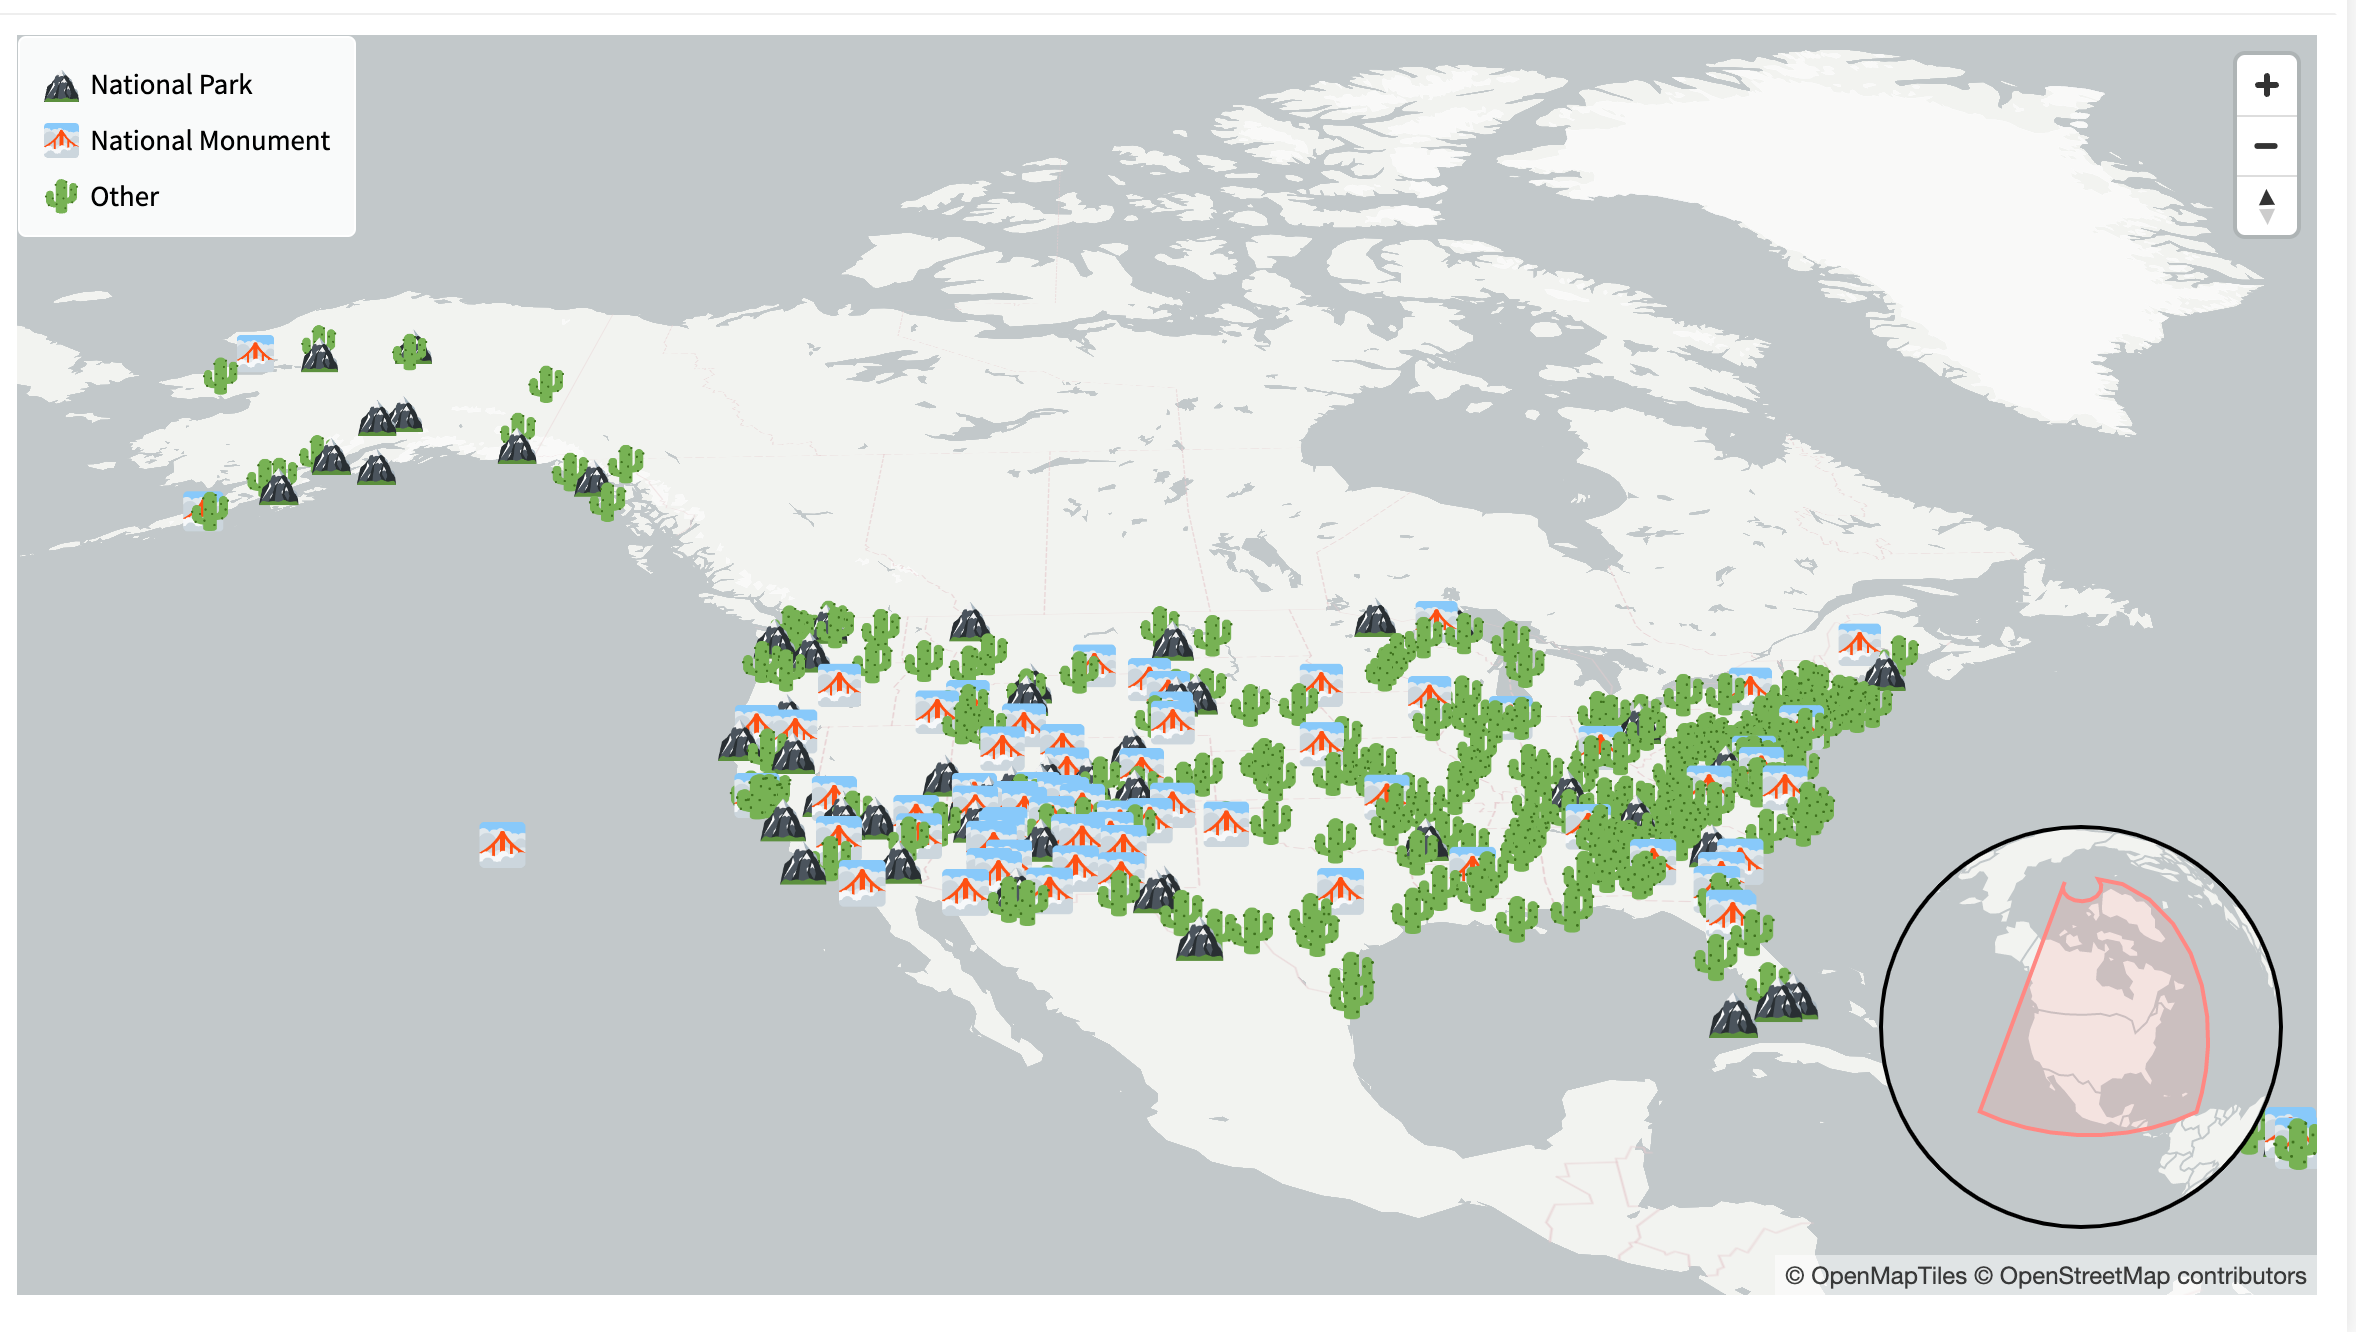 A data visualization of the number of national parks and monument in the US and Canada